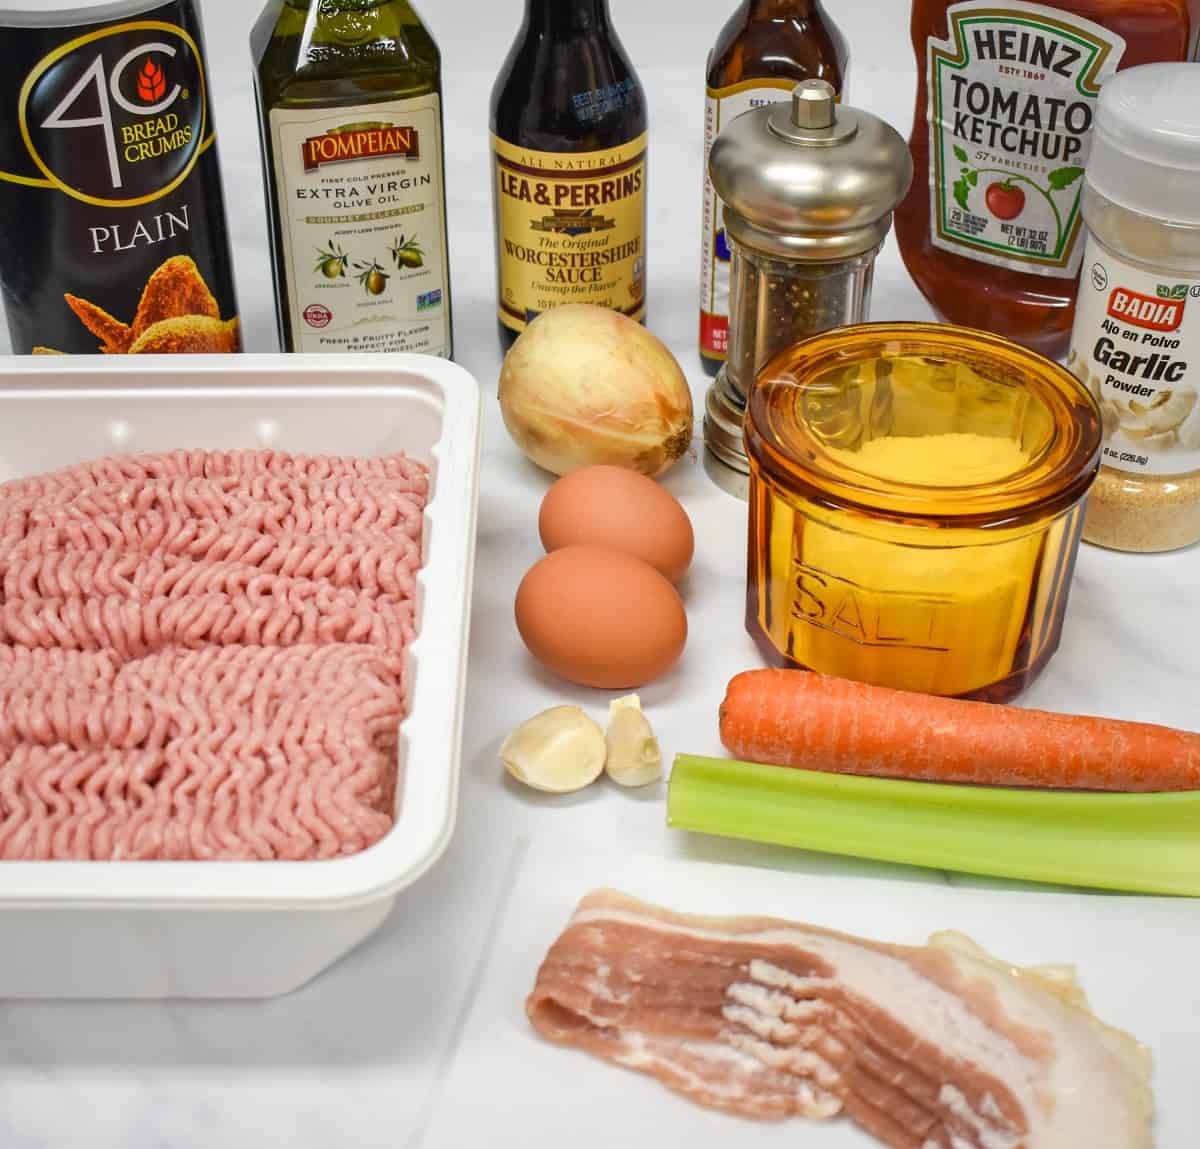 The ingredients for the meatloaf arranged on a white table.